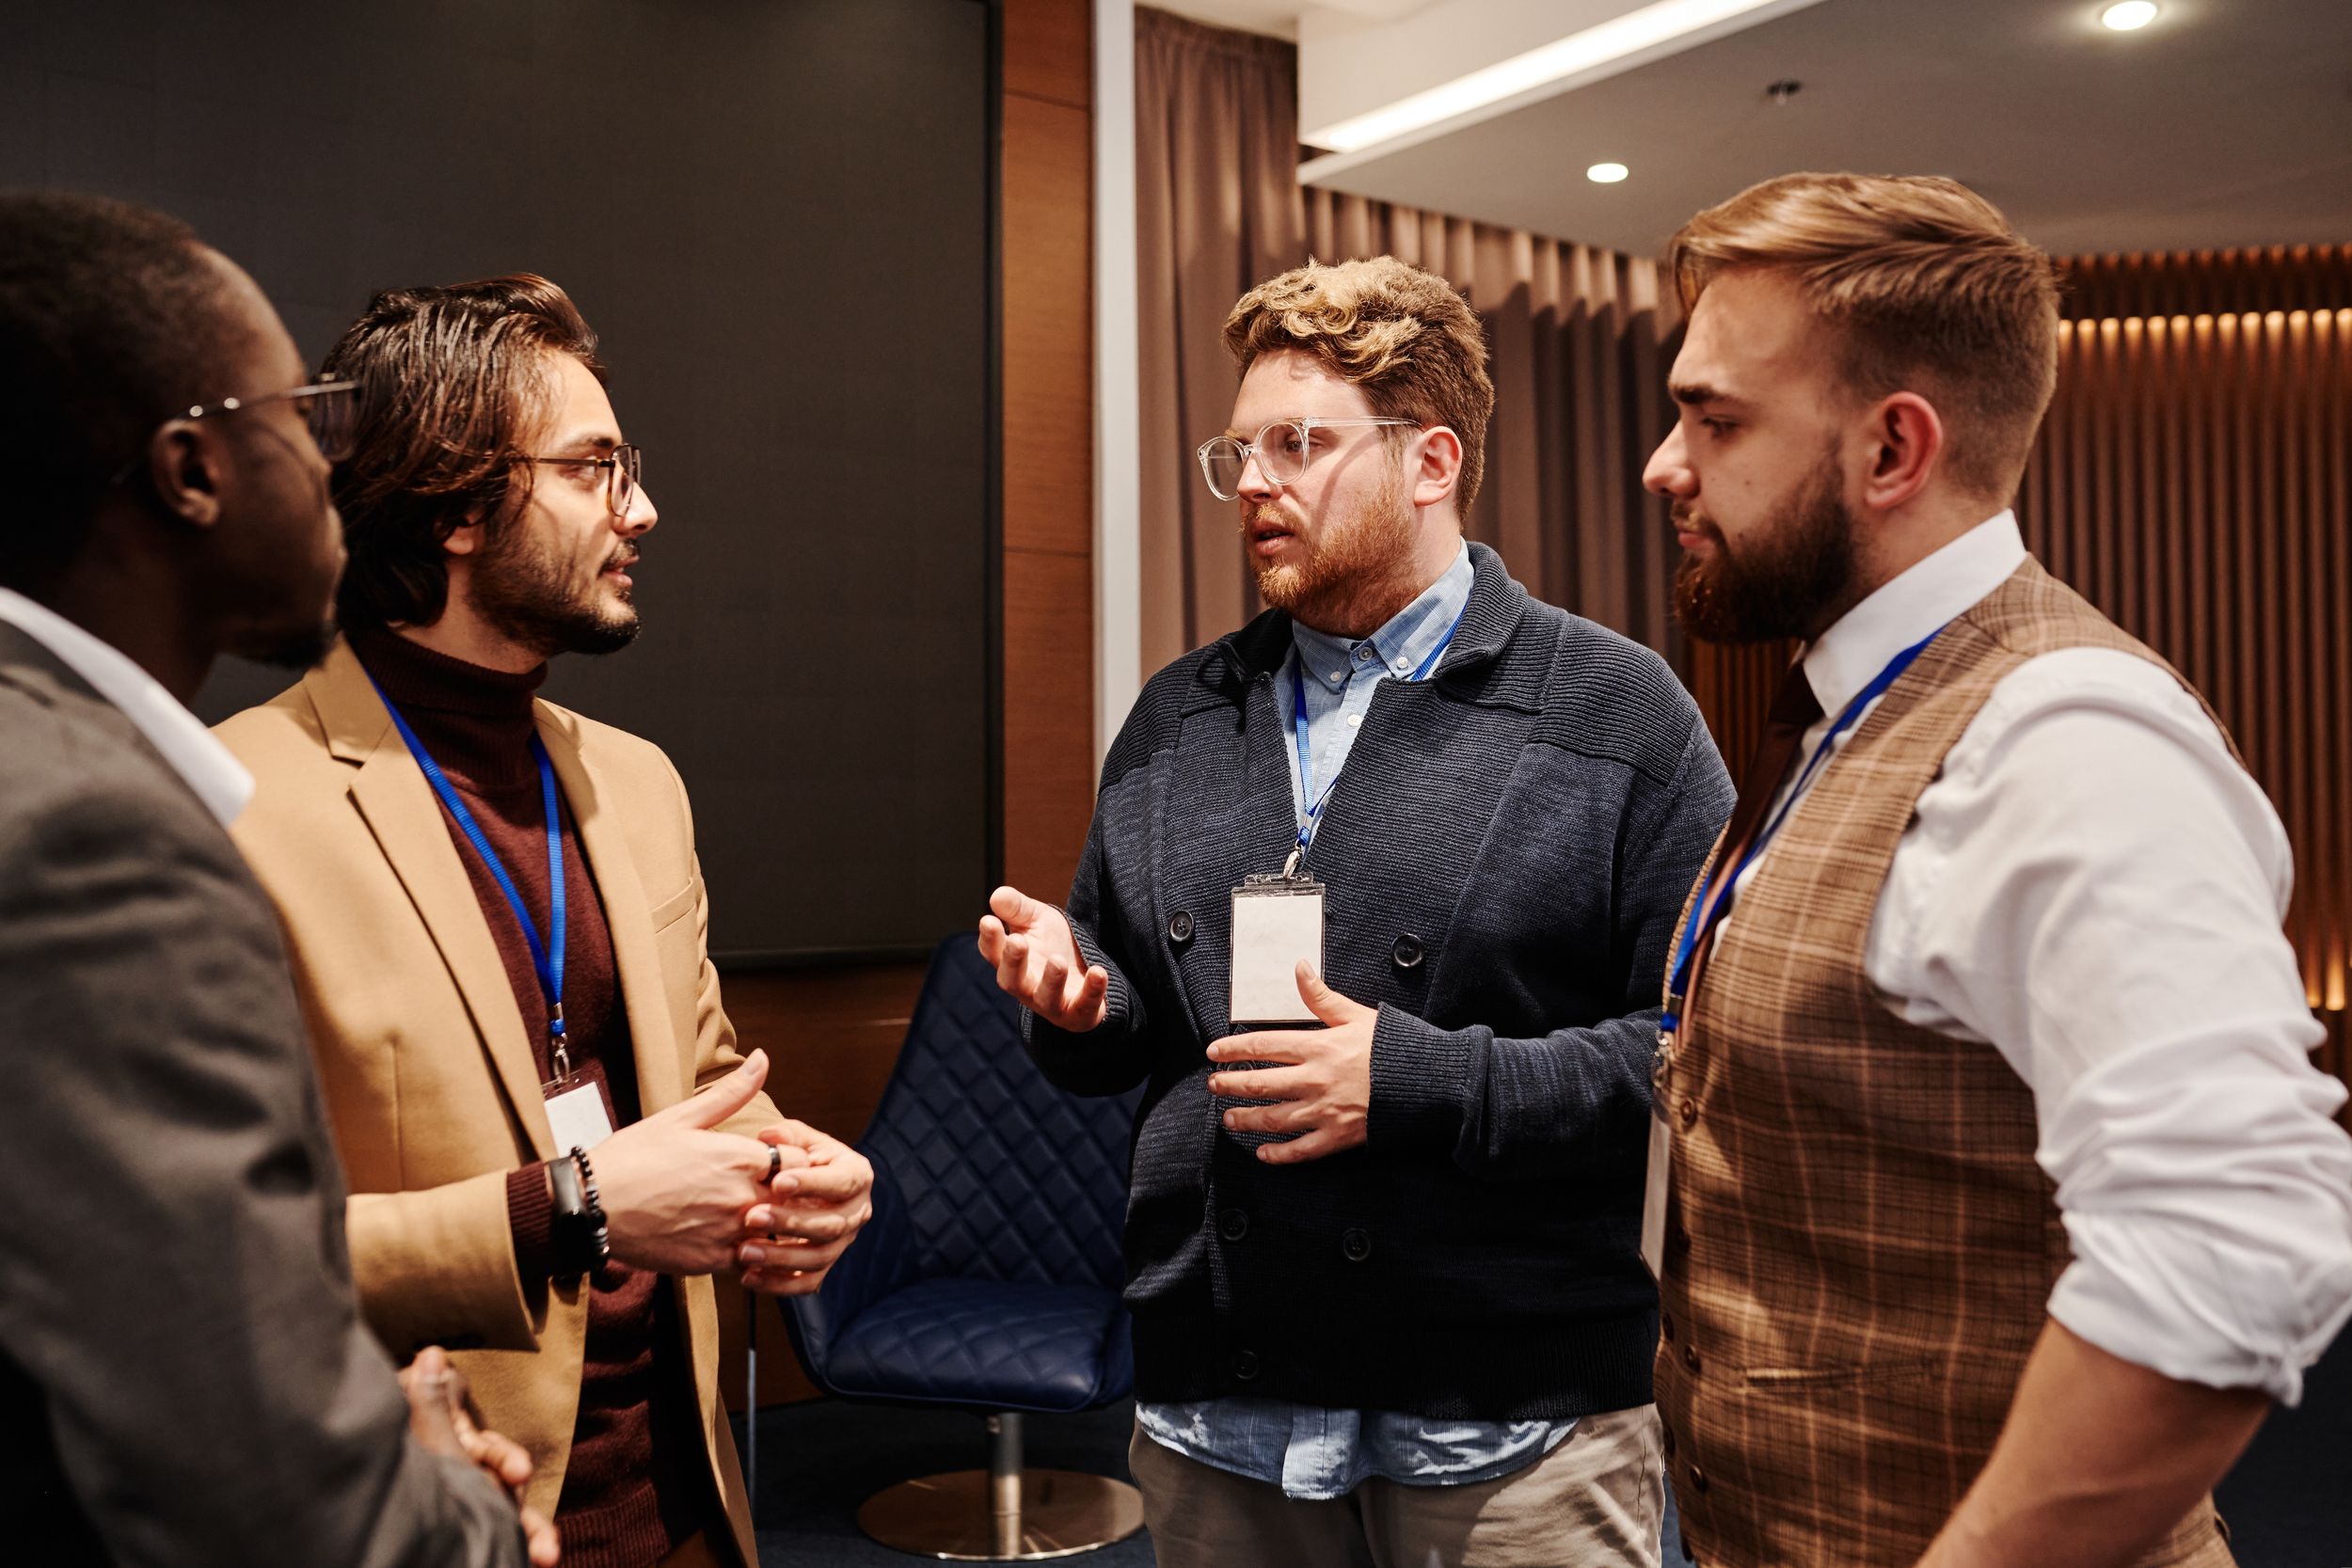 Group of people in business attire chatting at an event.